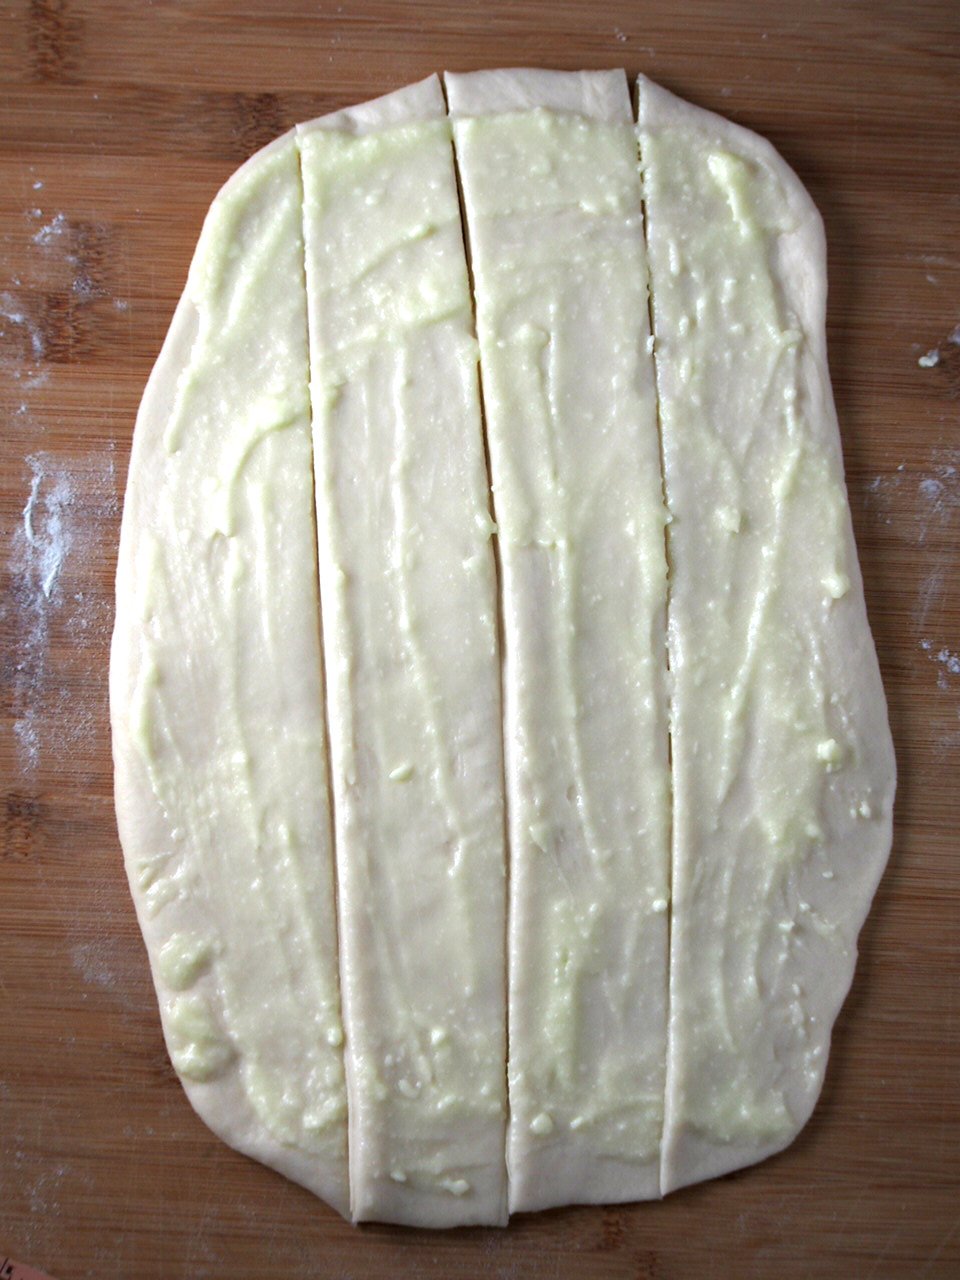 The dough is rolled into a rectangle and the condensed milk mixture is spread onto the surface of the dough. The dough is cut vertically into 4 sections.